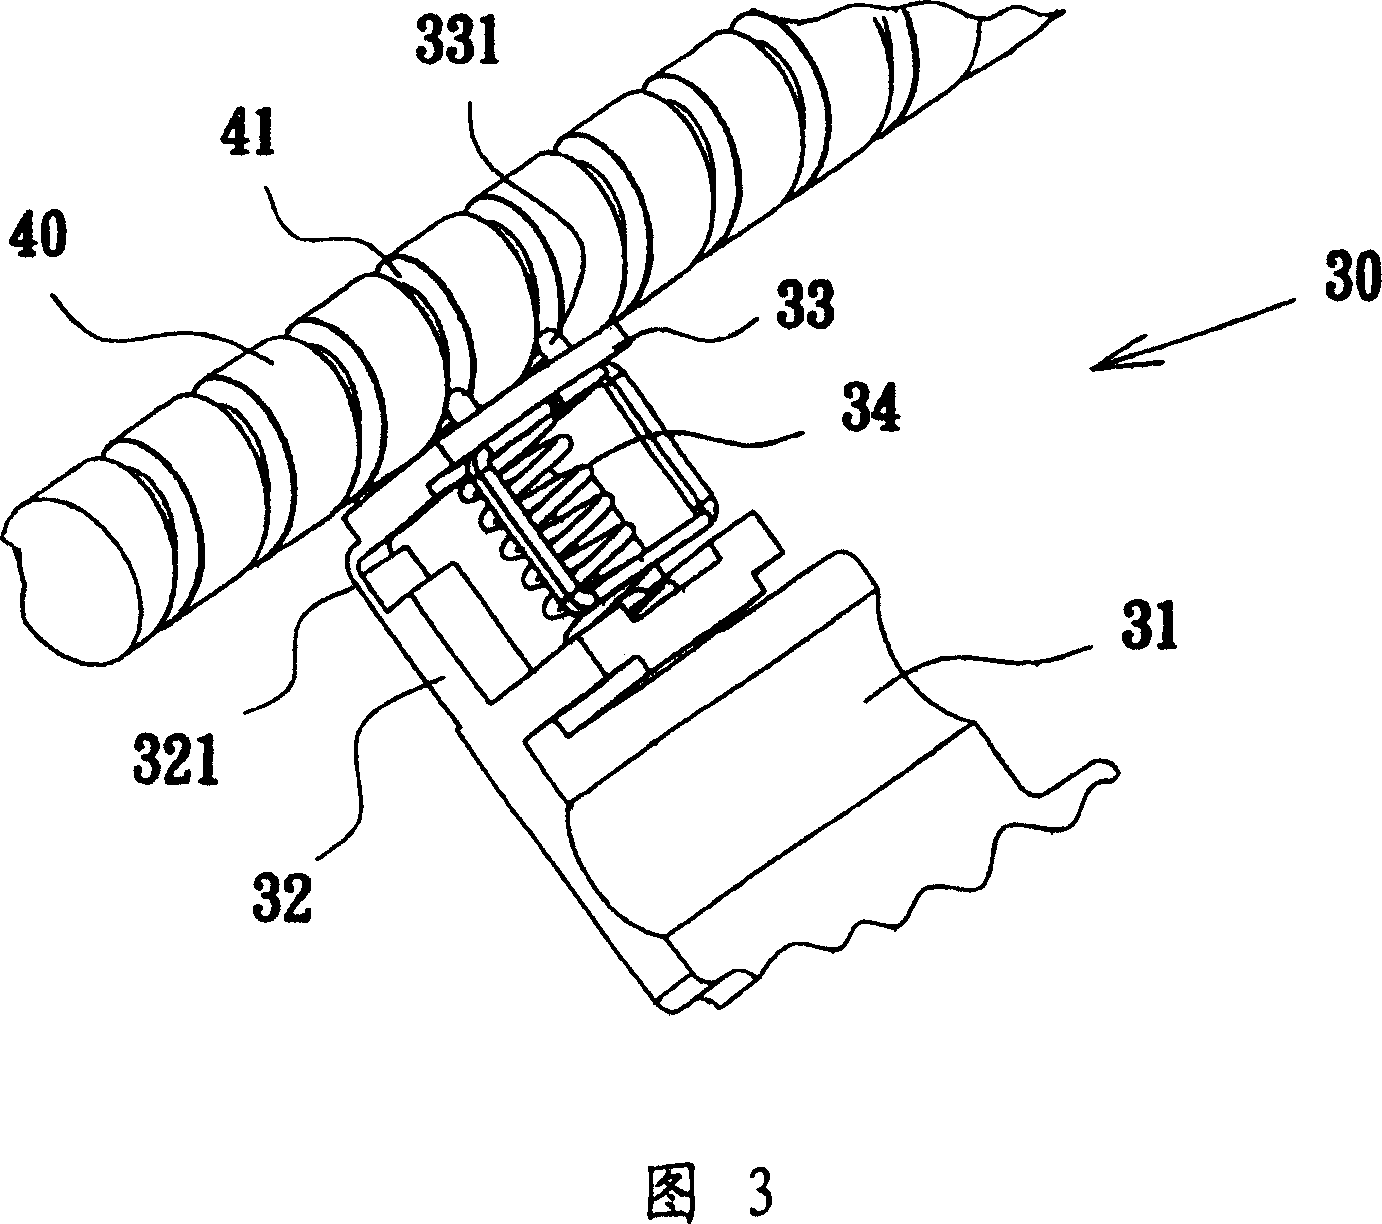 Structure for preventing gear slippage in optical disk drive